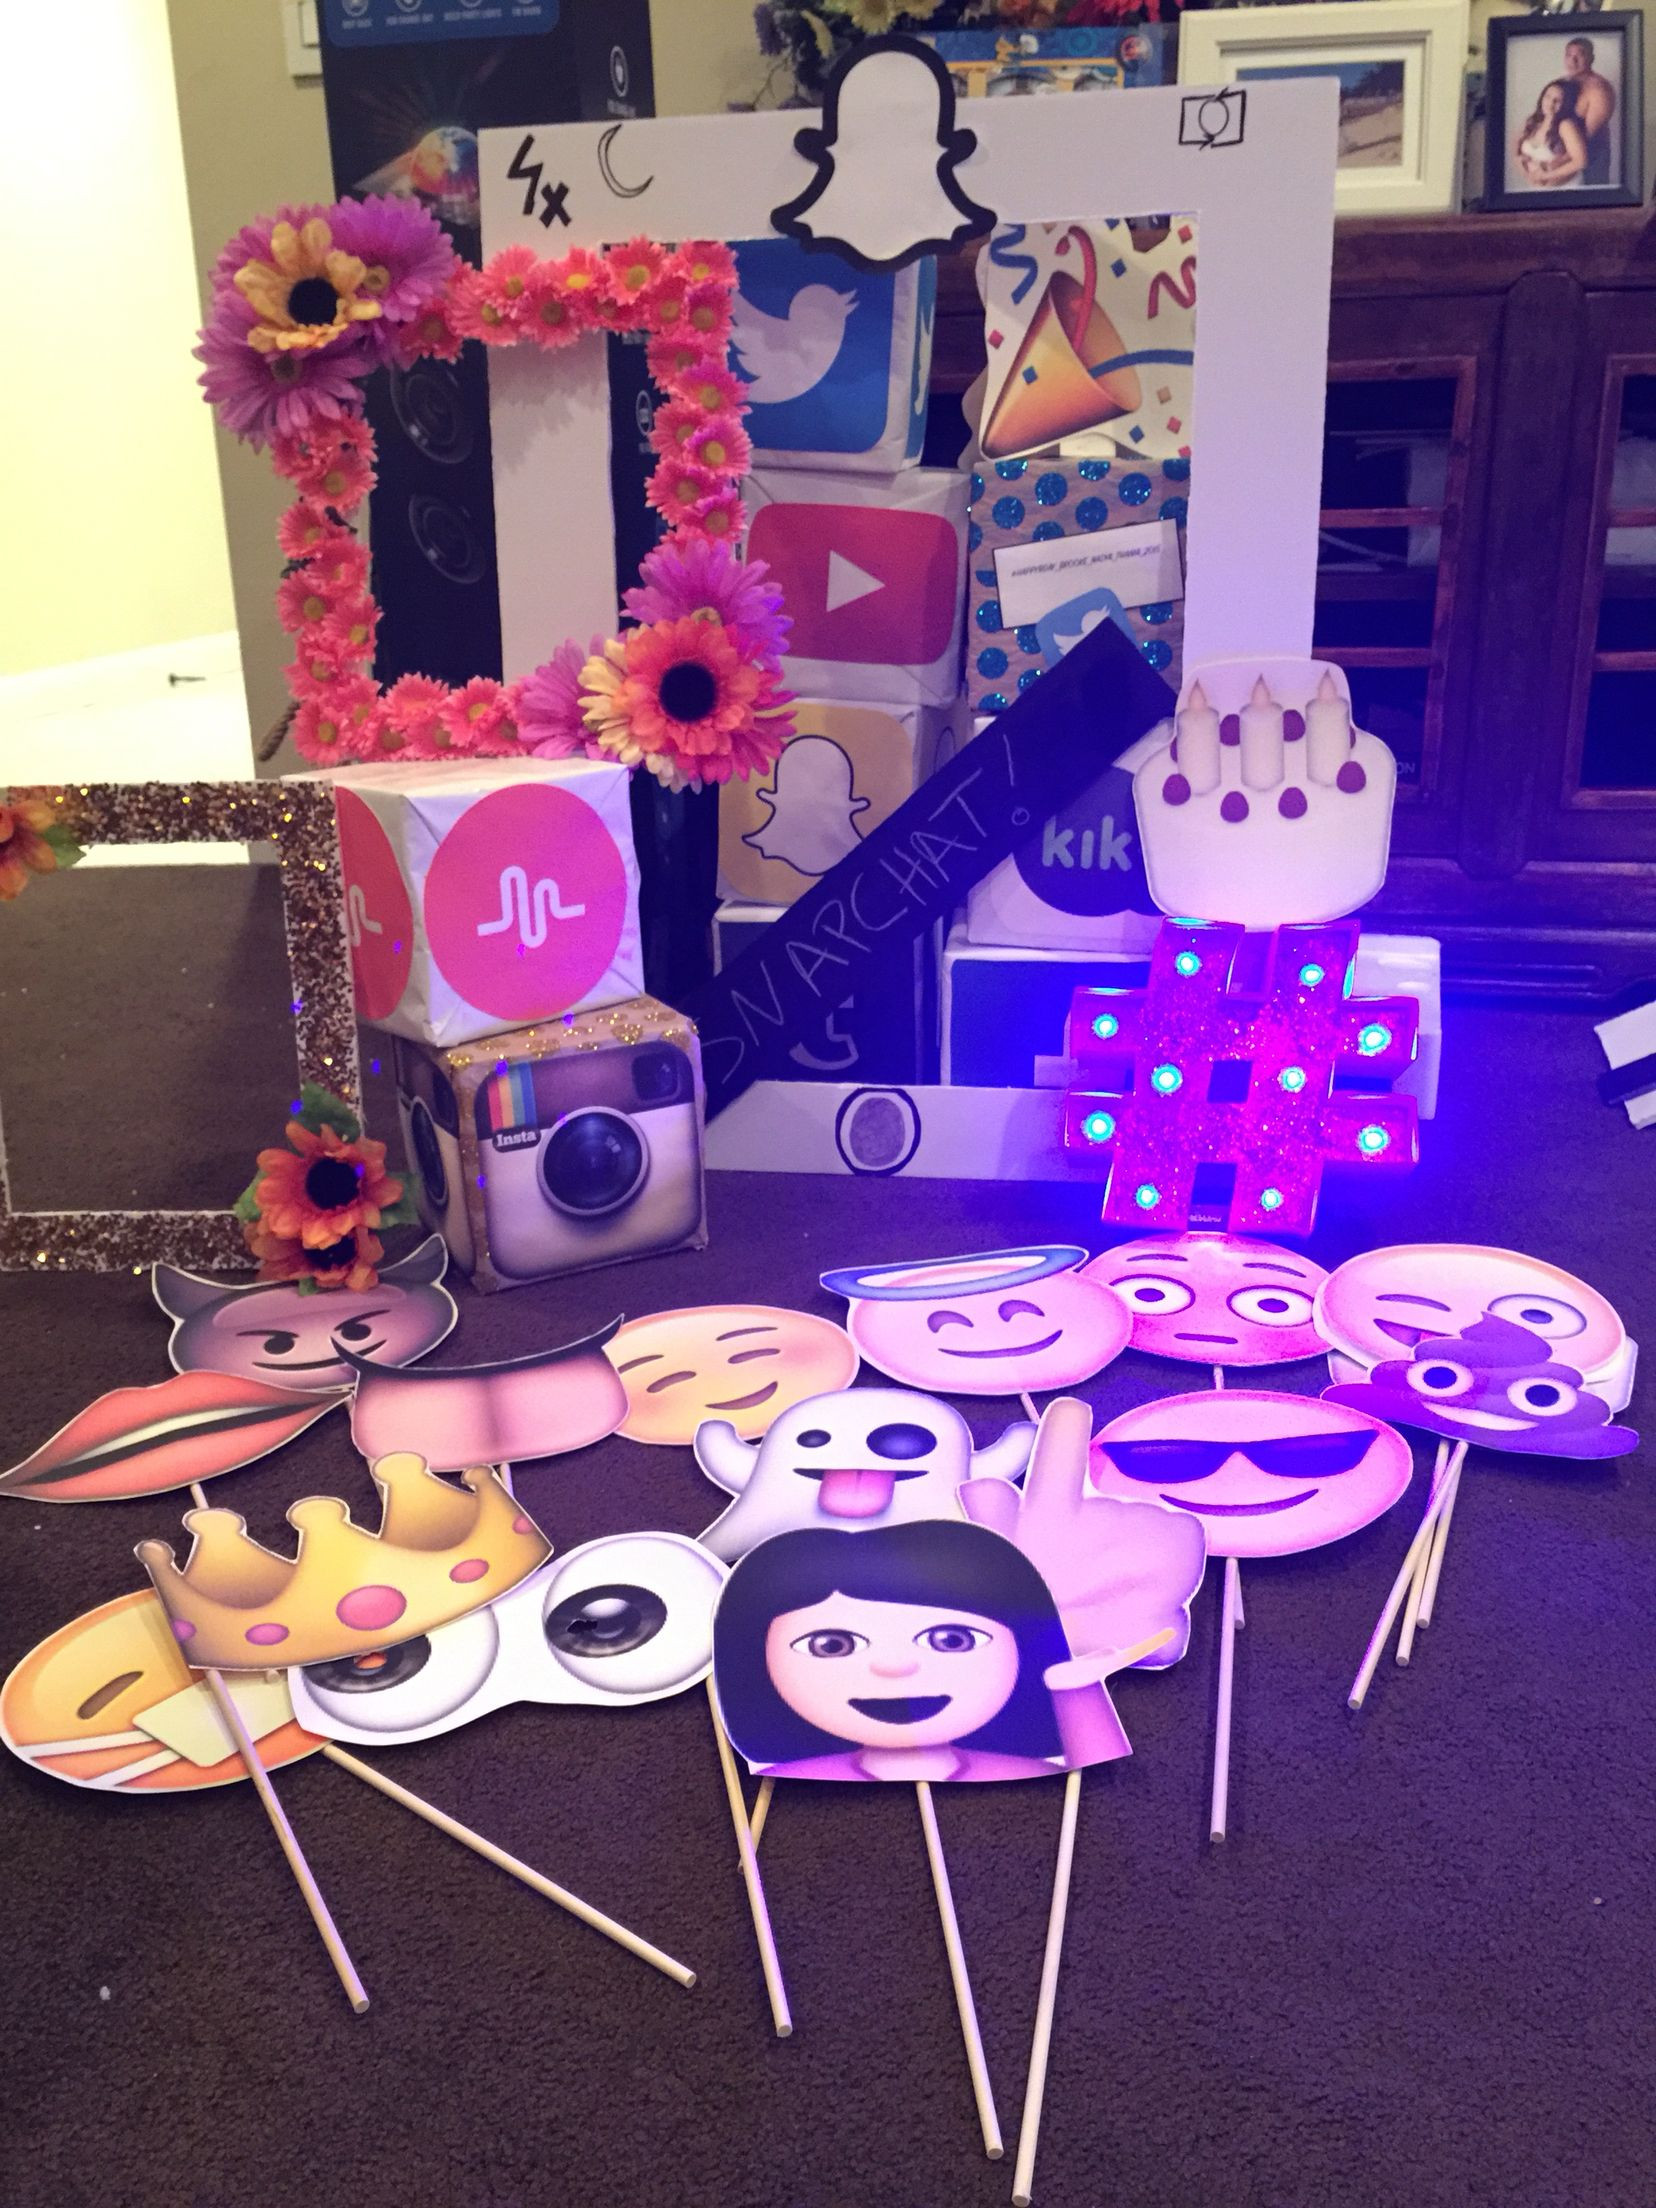 Fun Ideas For Teenage Girl Birthday Party
 Social Media Party props I made